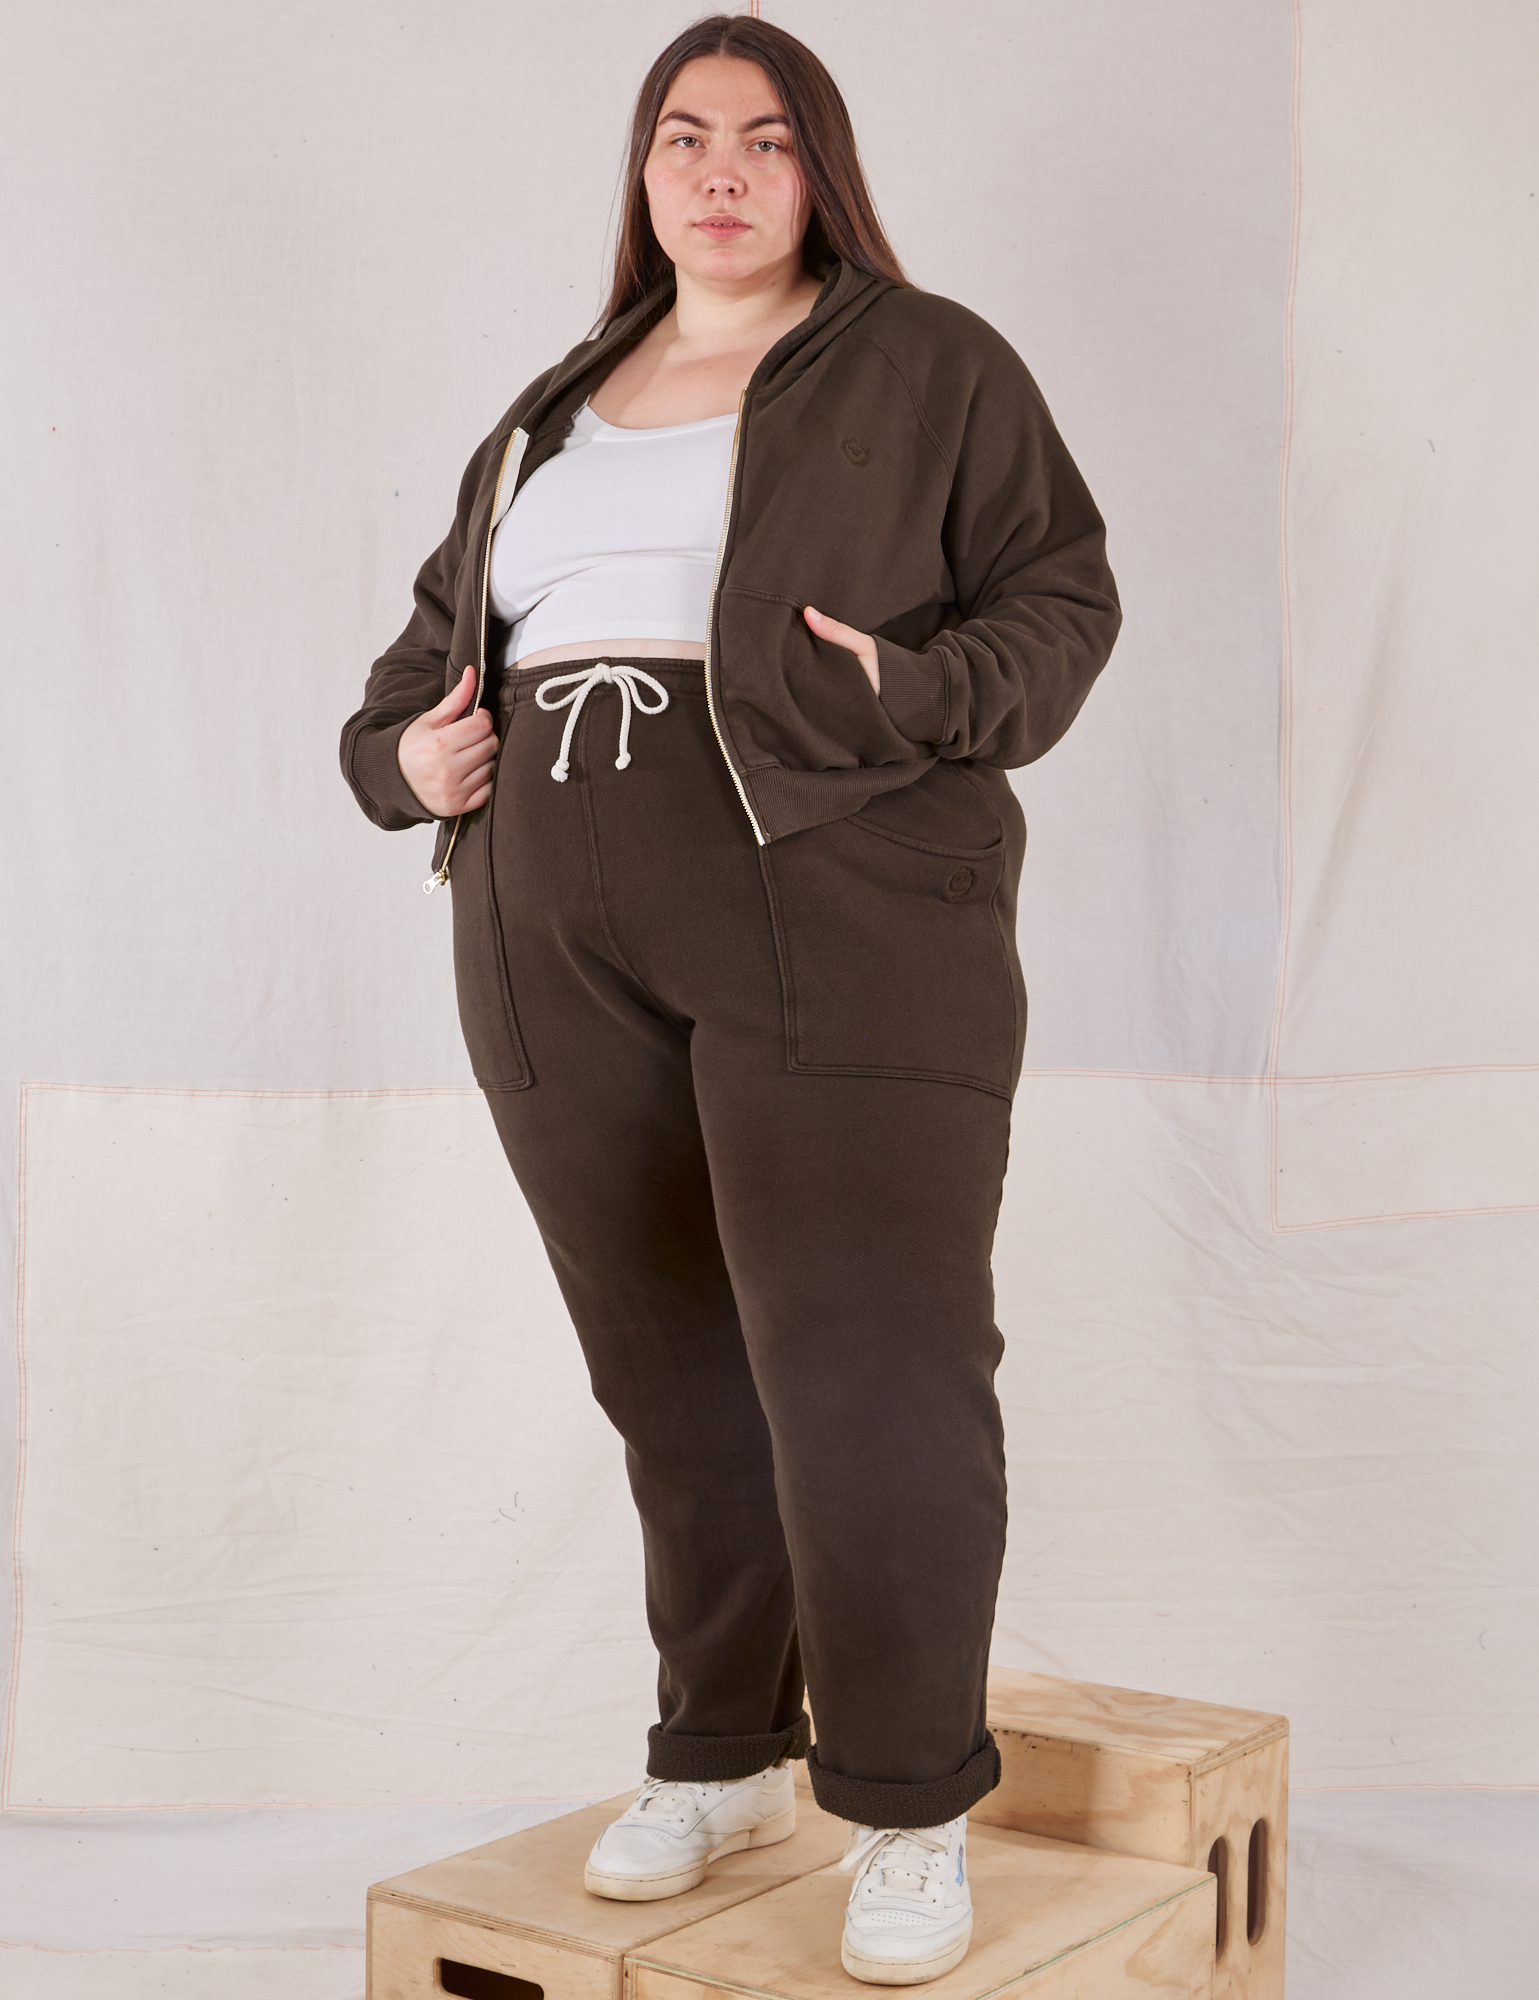 Marielena is wearing Cropped Zip Hoodie in Espresso Brown and matching Rolled Cuff Sweat Pants